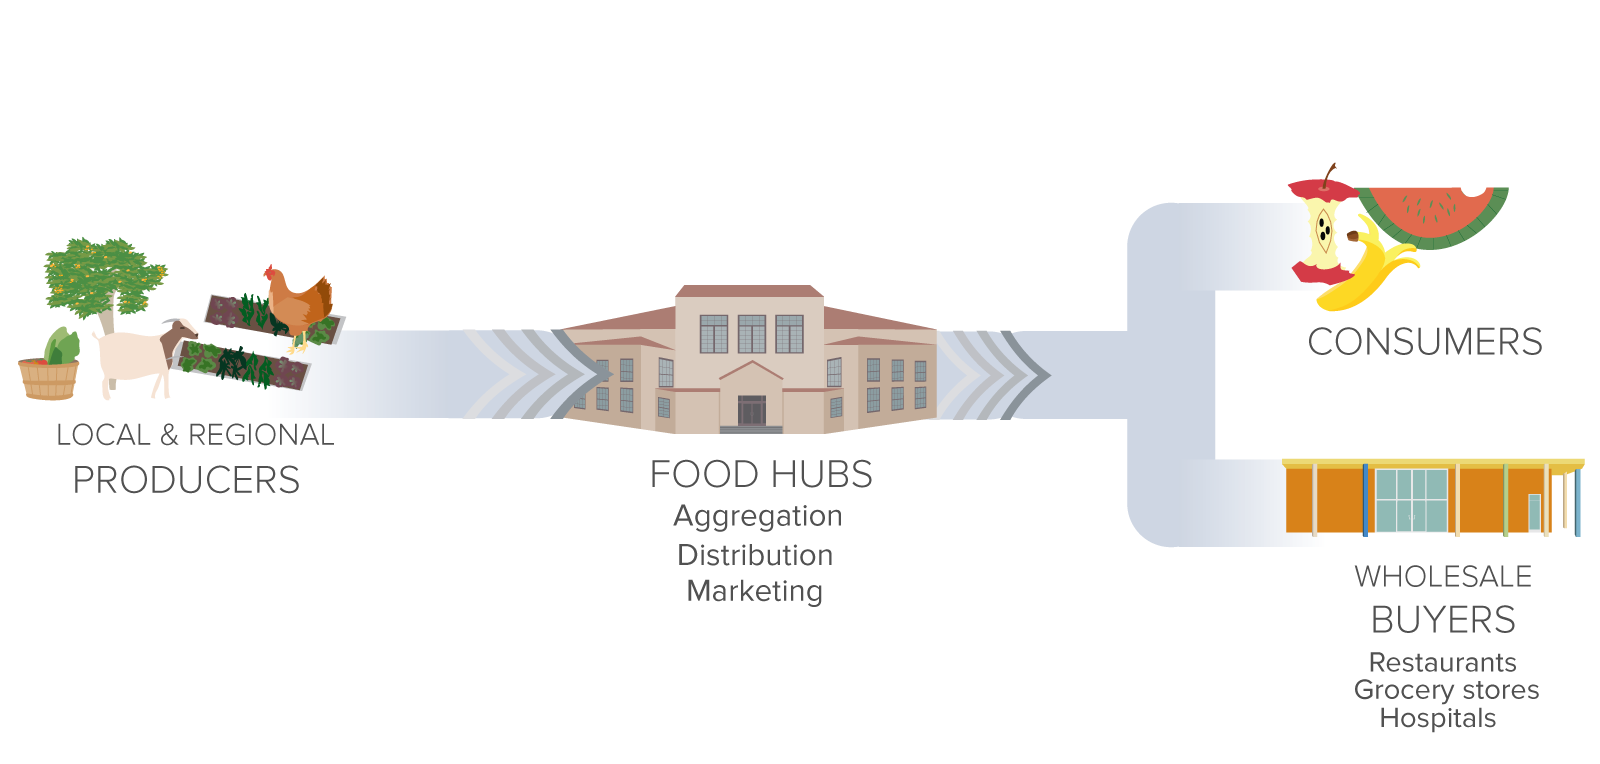 Food hubs aggregate food from producers and sell to wholesale buyers or consumers